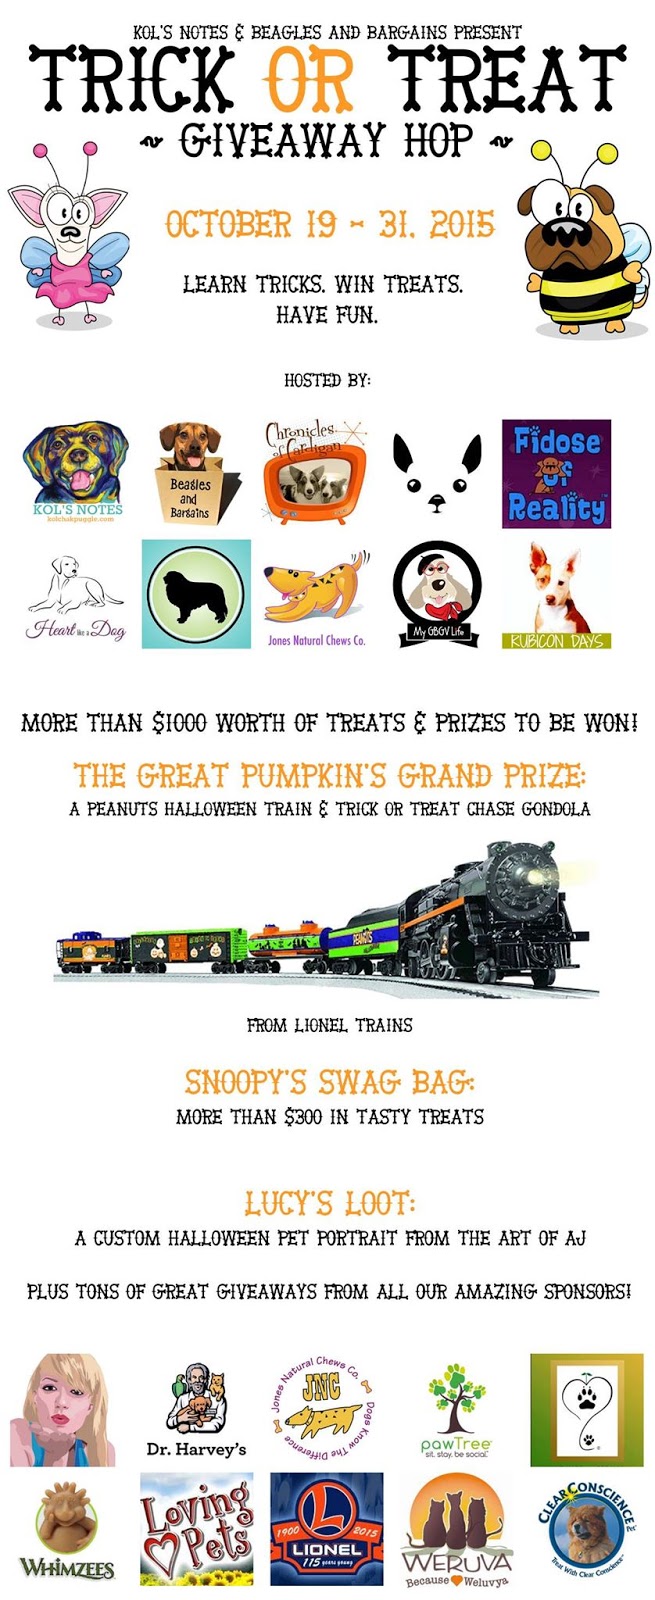 Trick or Treat Giveaway Hop dog cartoon graphic in poster size, including logos of all blogs and brands participating